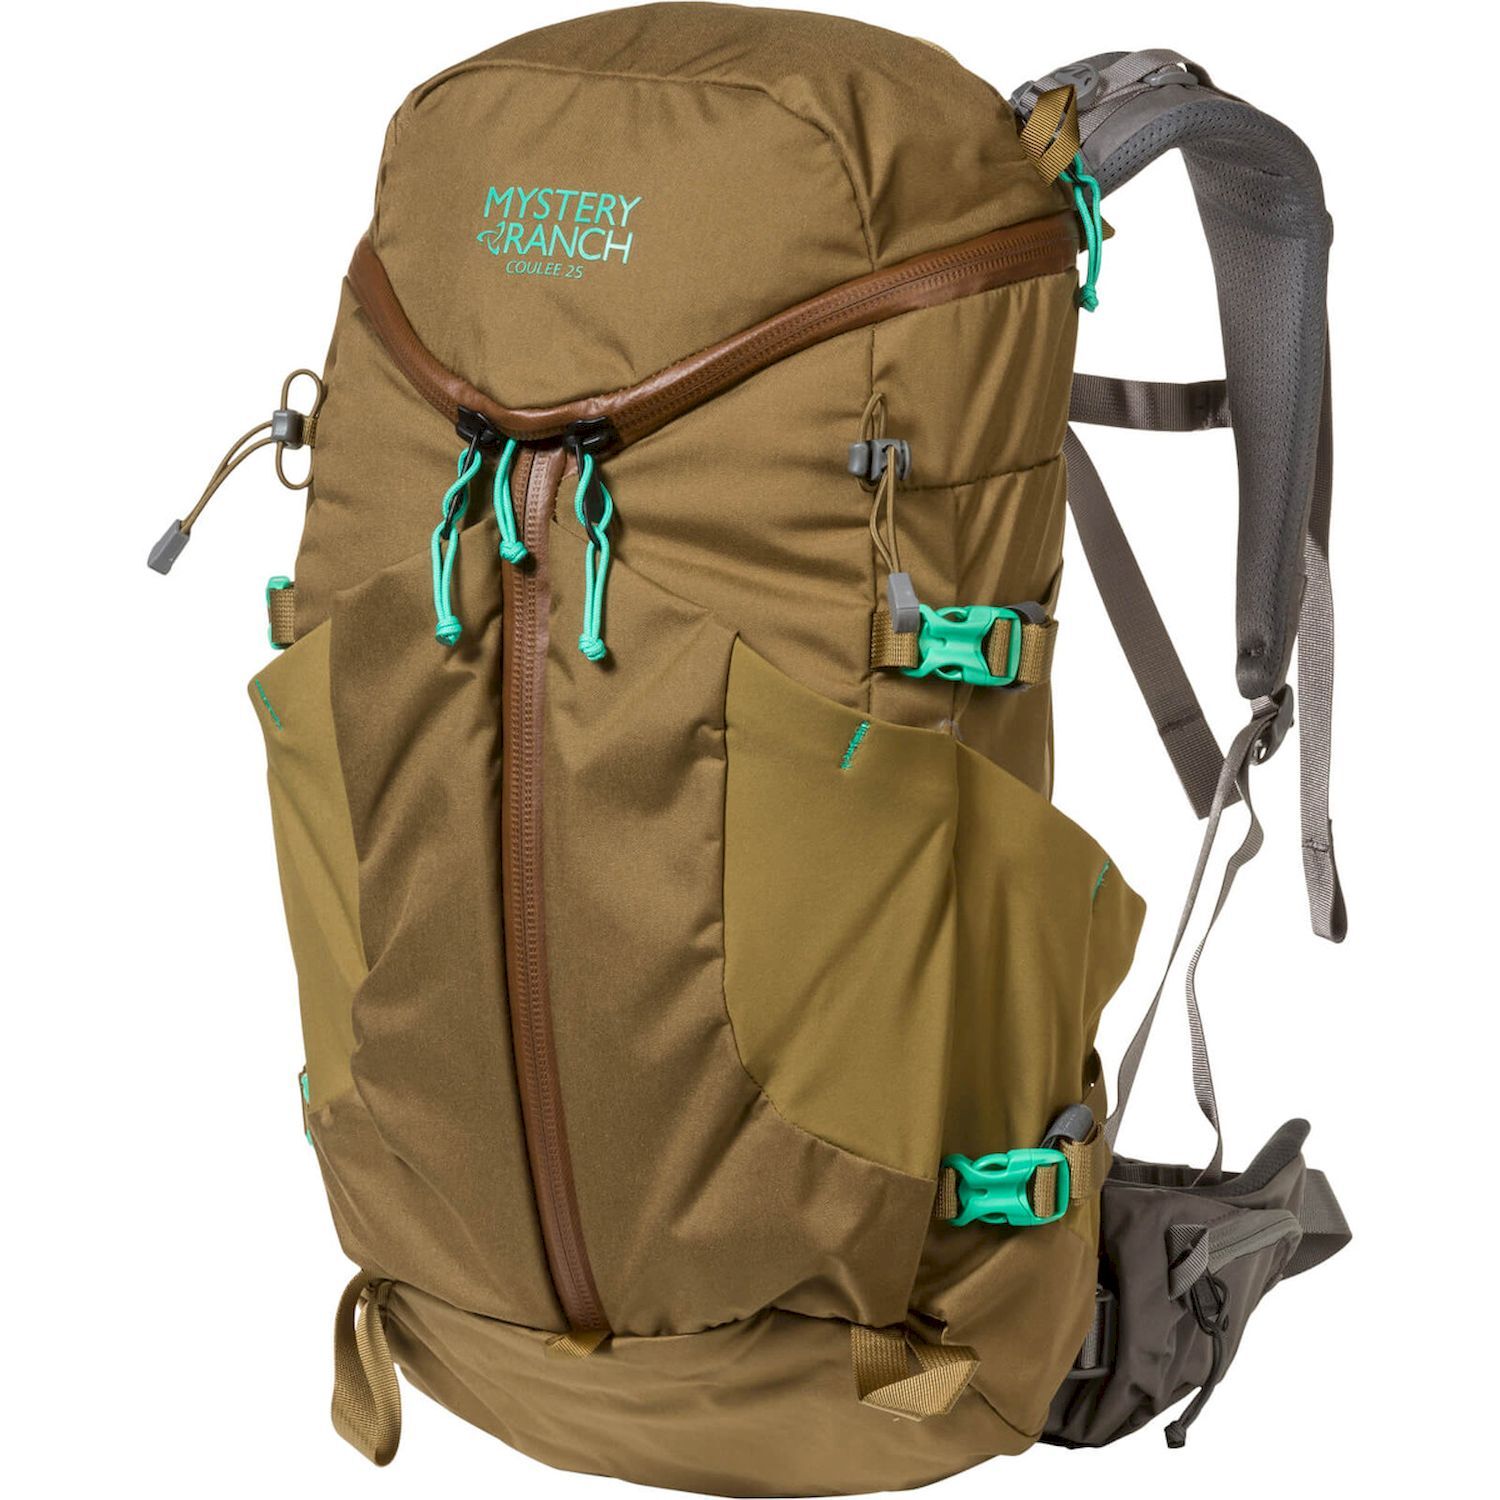 Mystery Ranch Coulee 25 - Sac à dos trekking femme | Hardloop